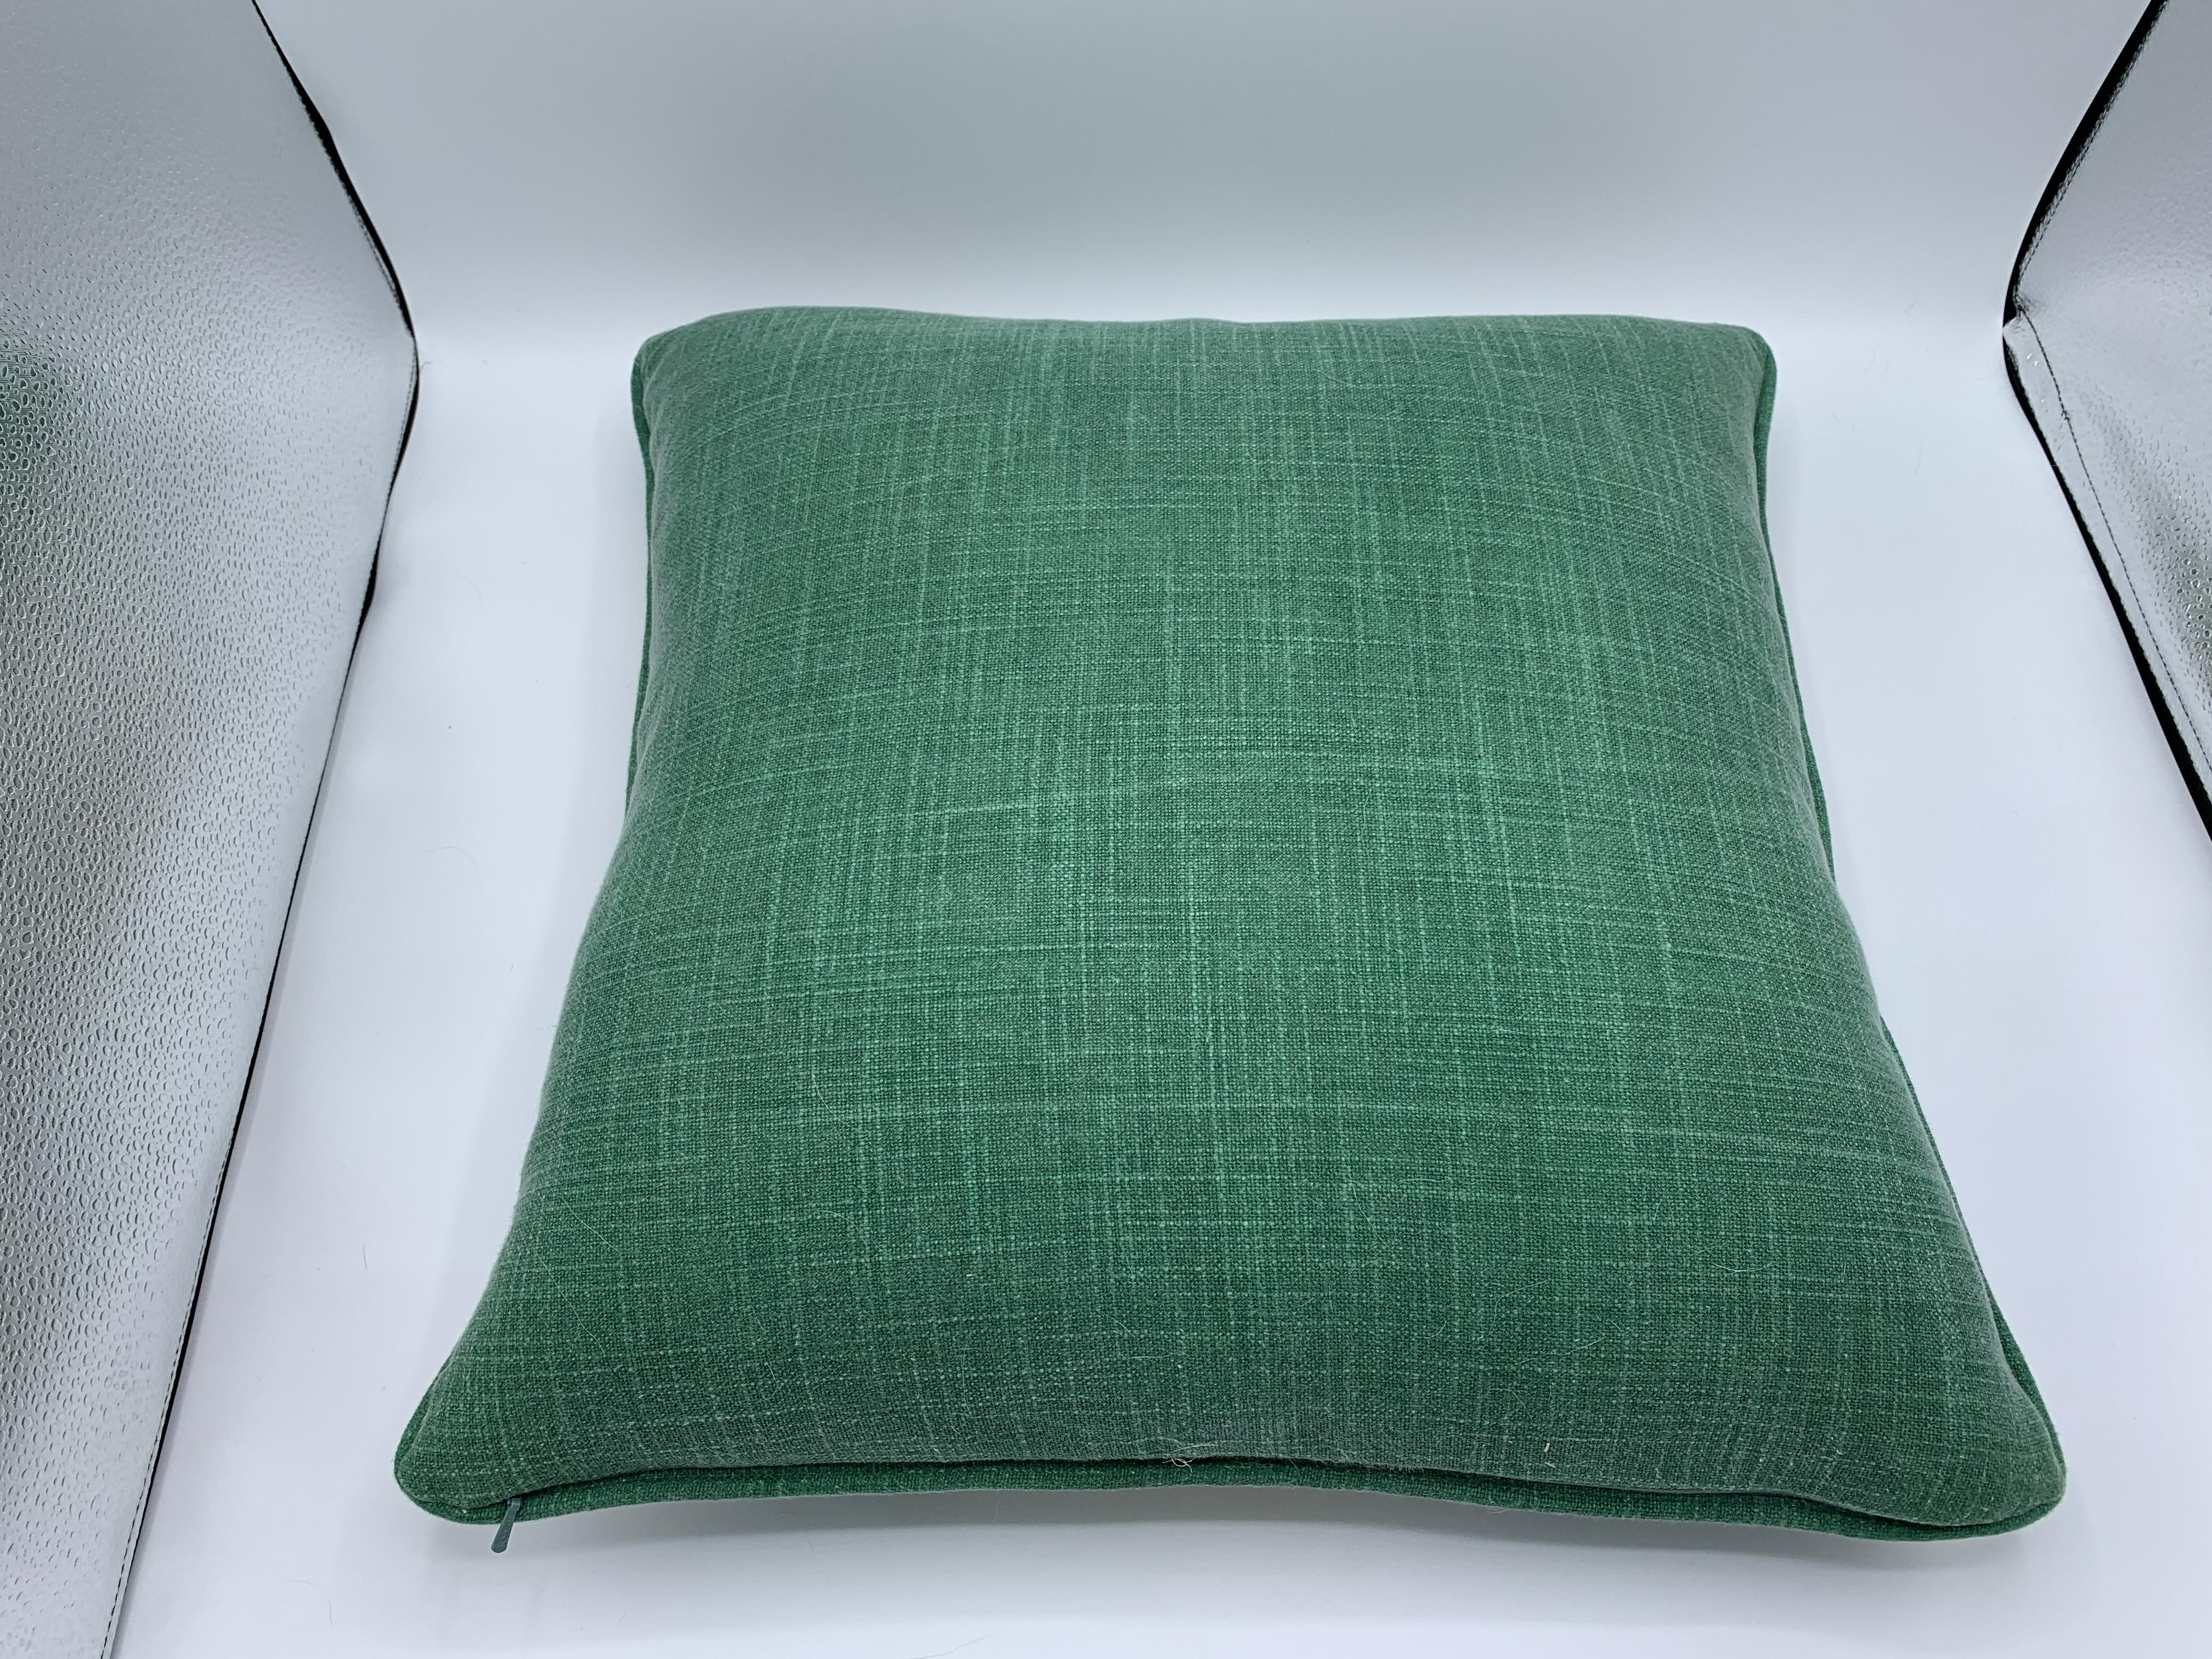 Green and White Linen Pillows with Damask Embroidery, Pair For Sale 4